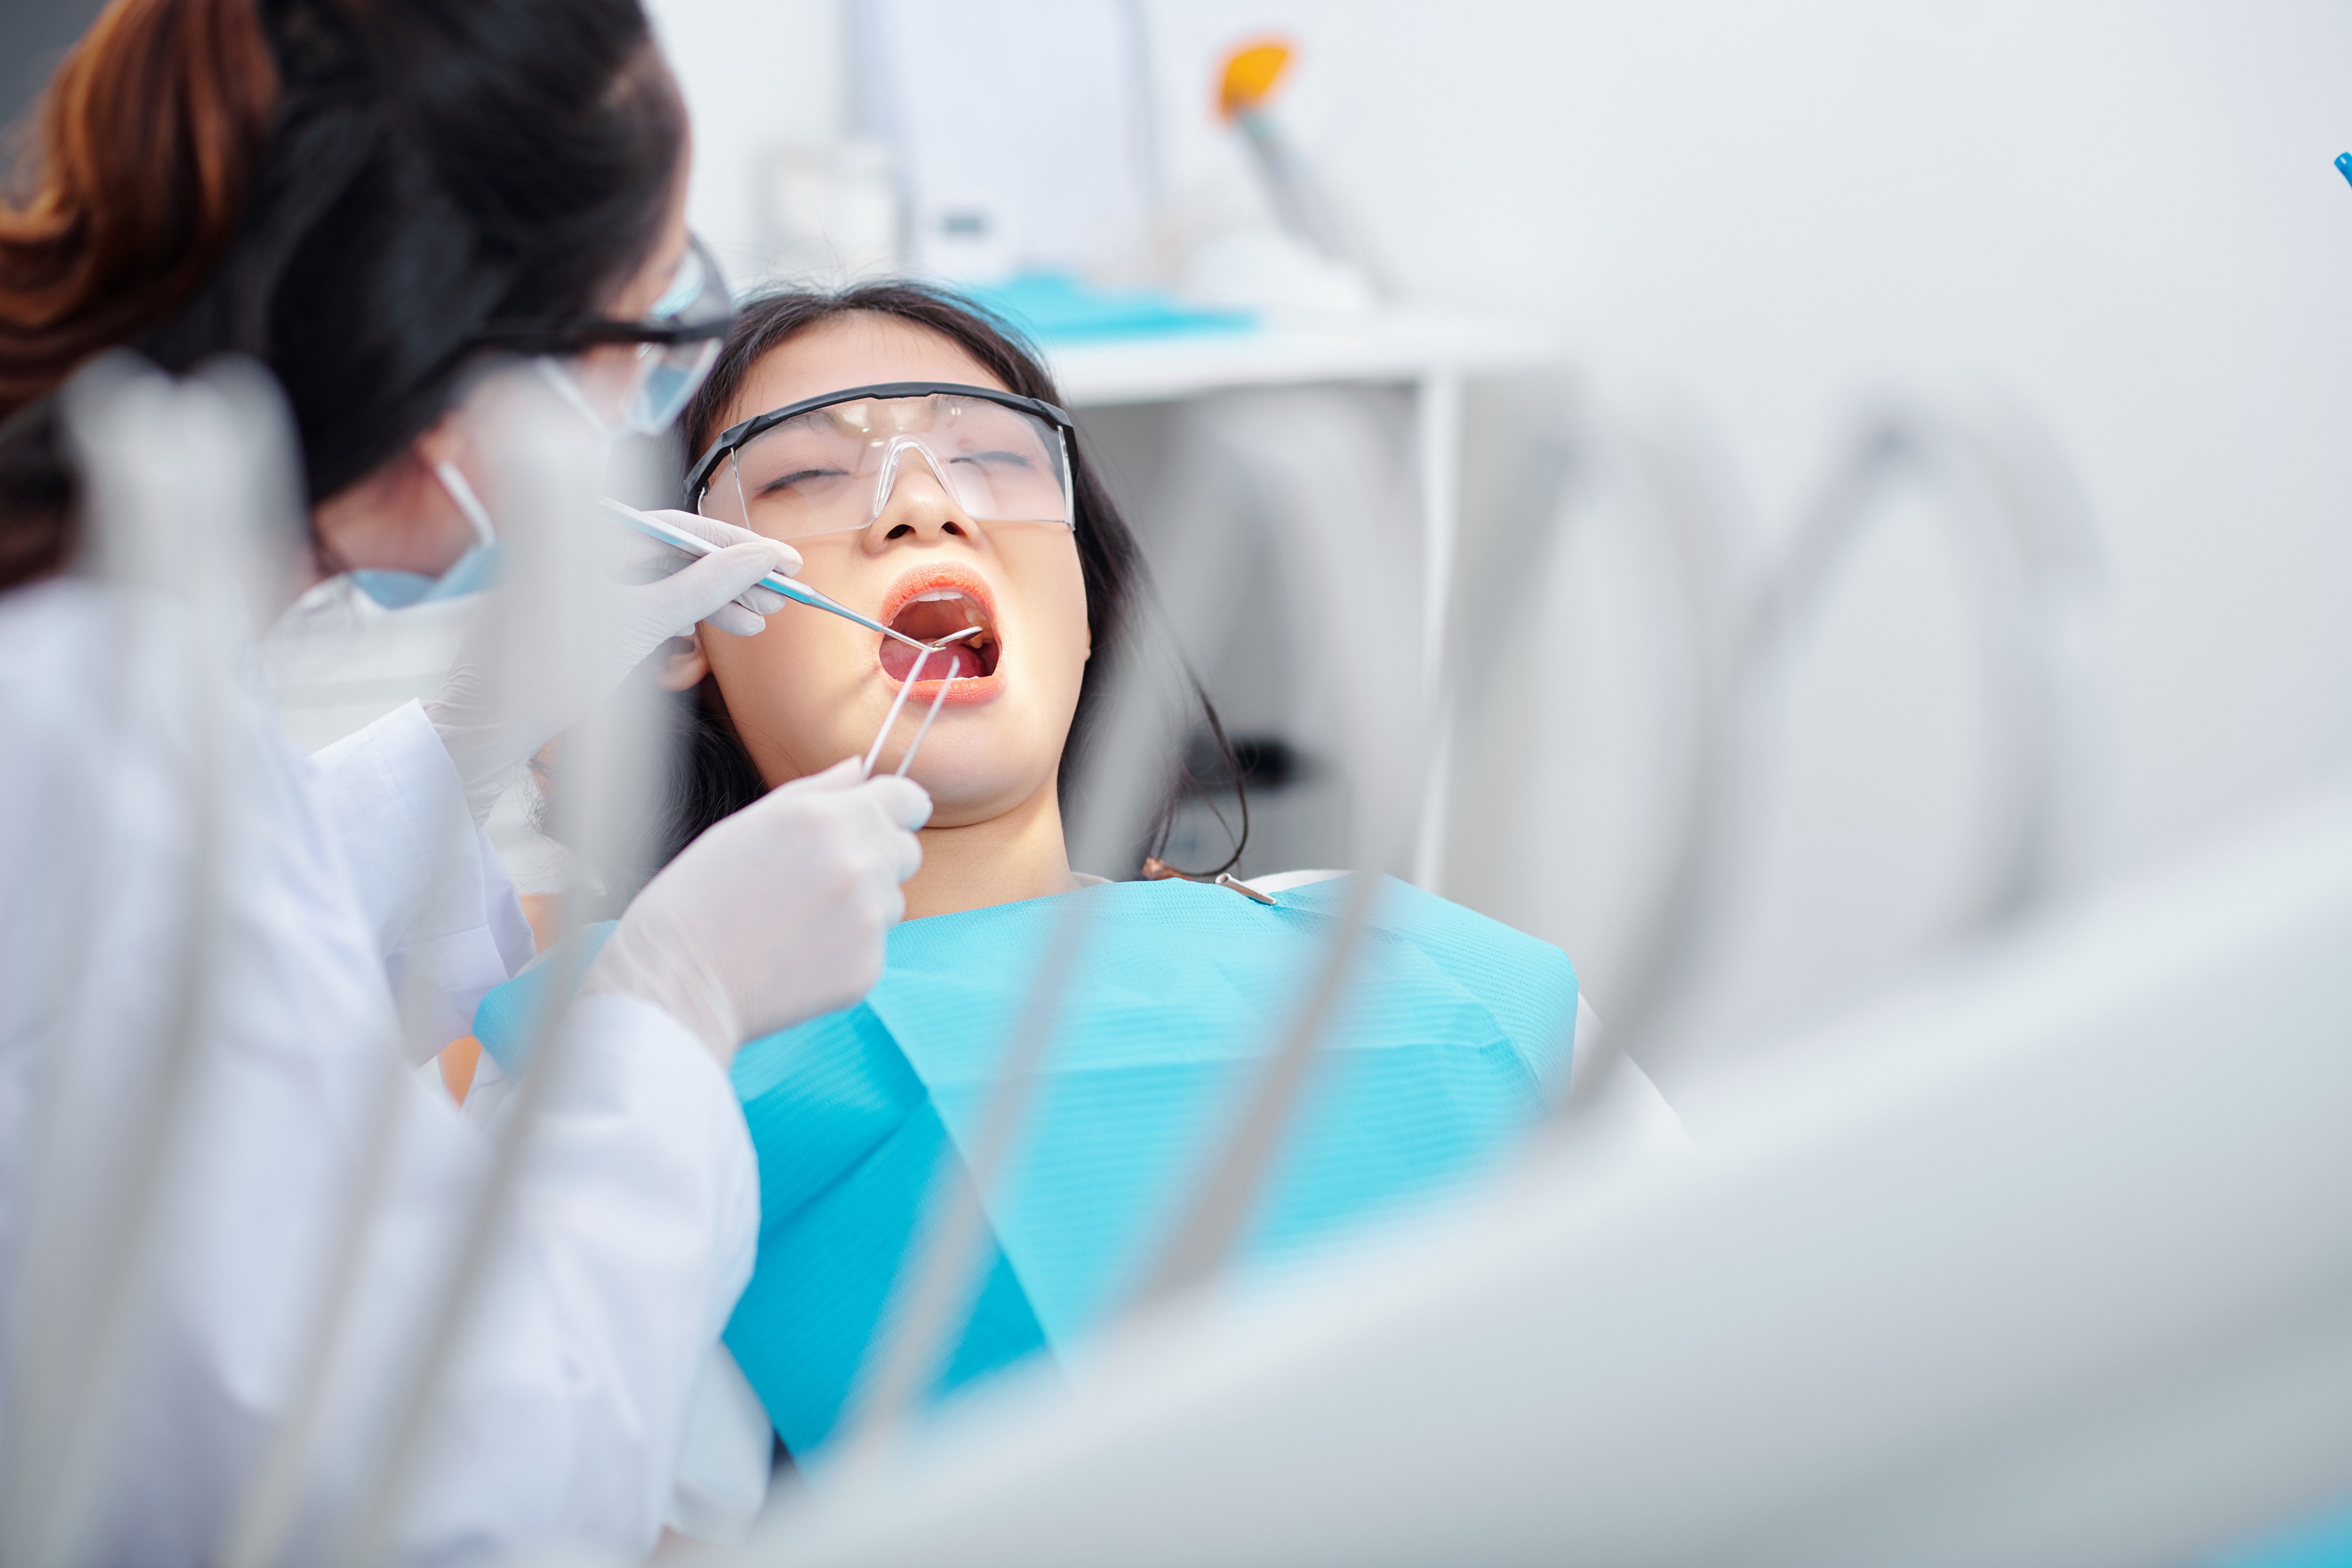 Hong Kong’s world-class public healthcare system has one major flaw: it is woefully inadequate for dental care. Photo: Shutterstock